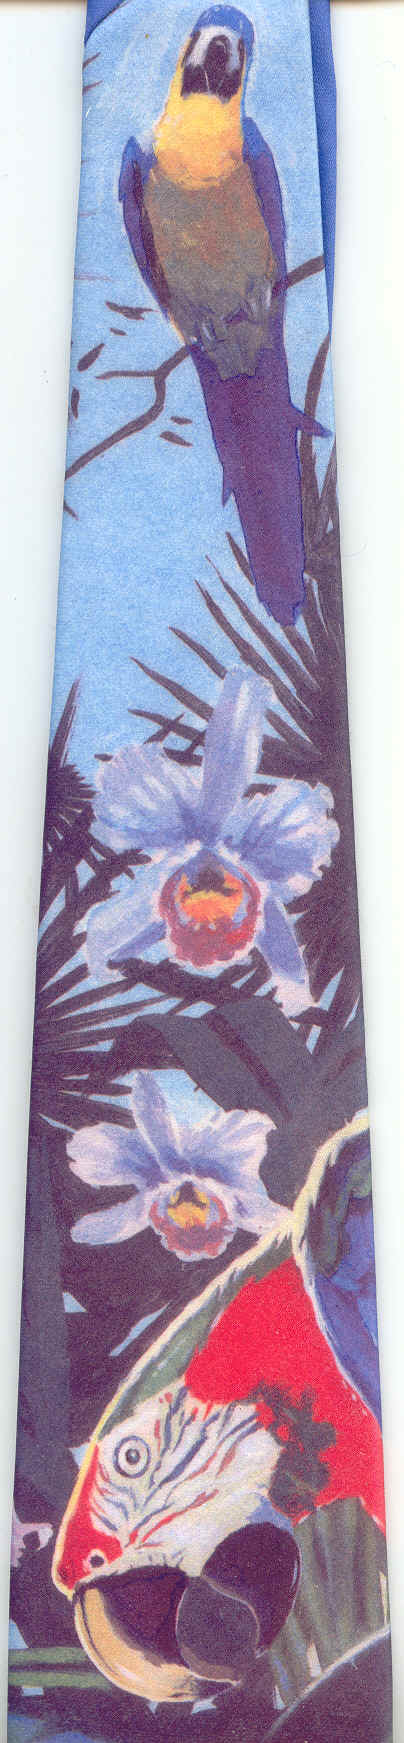 Maccaw and Orchids Tie necktie